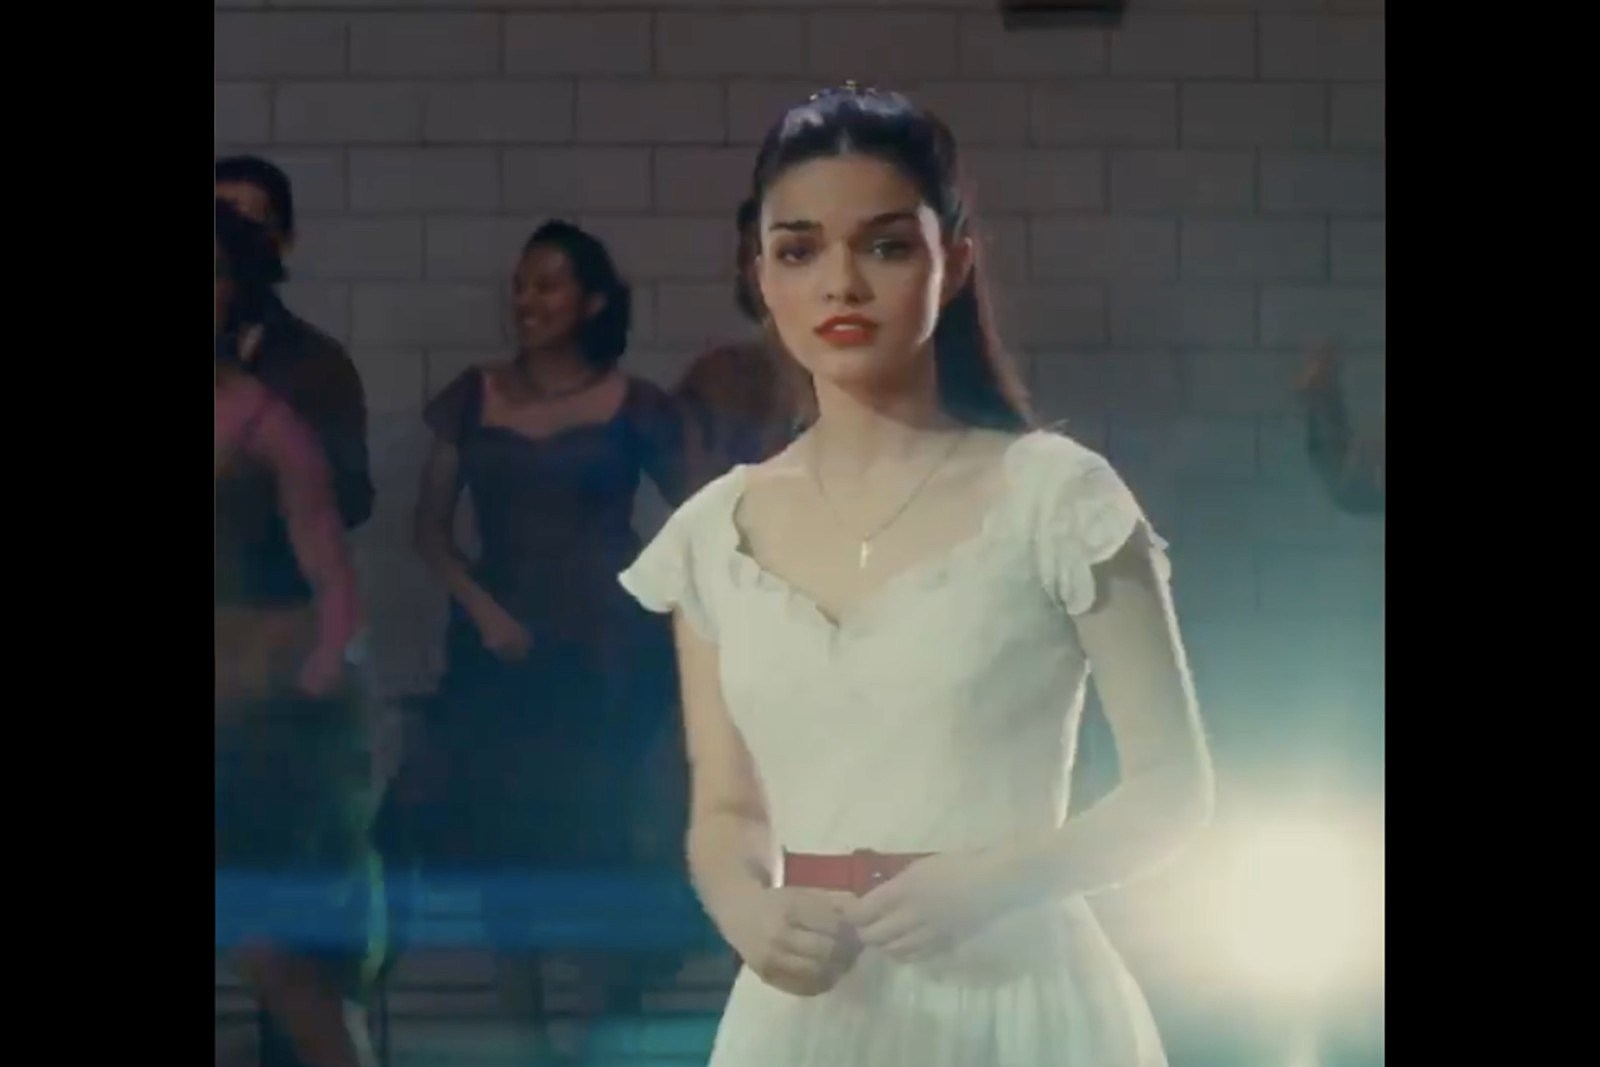 New trailer for West Side Story drops, featuring young NJ star pic